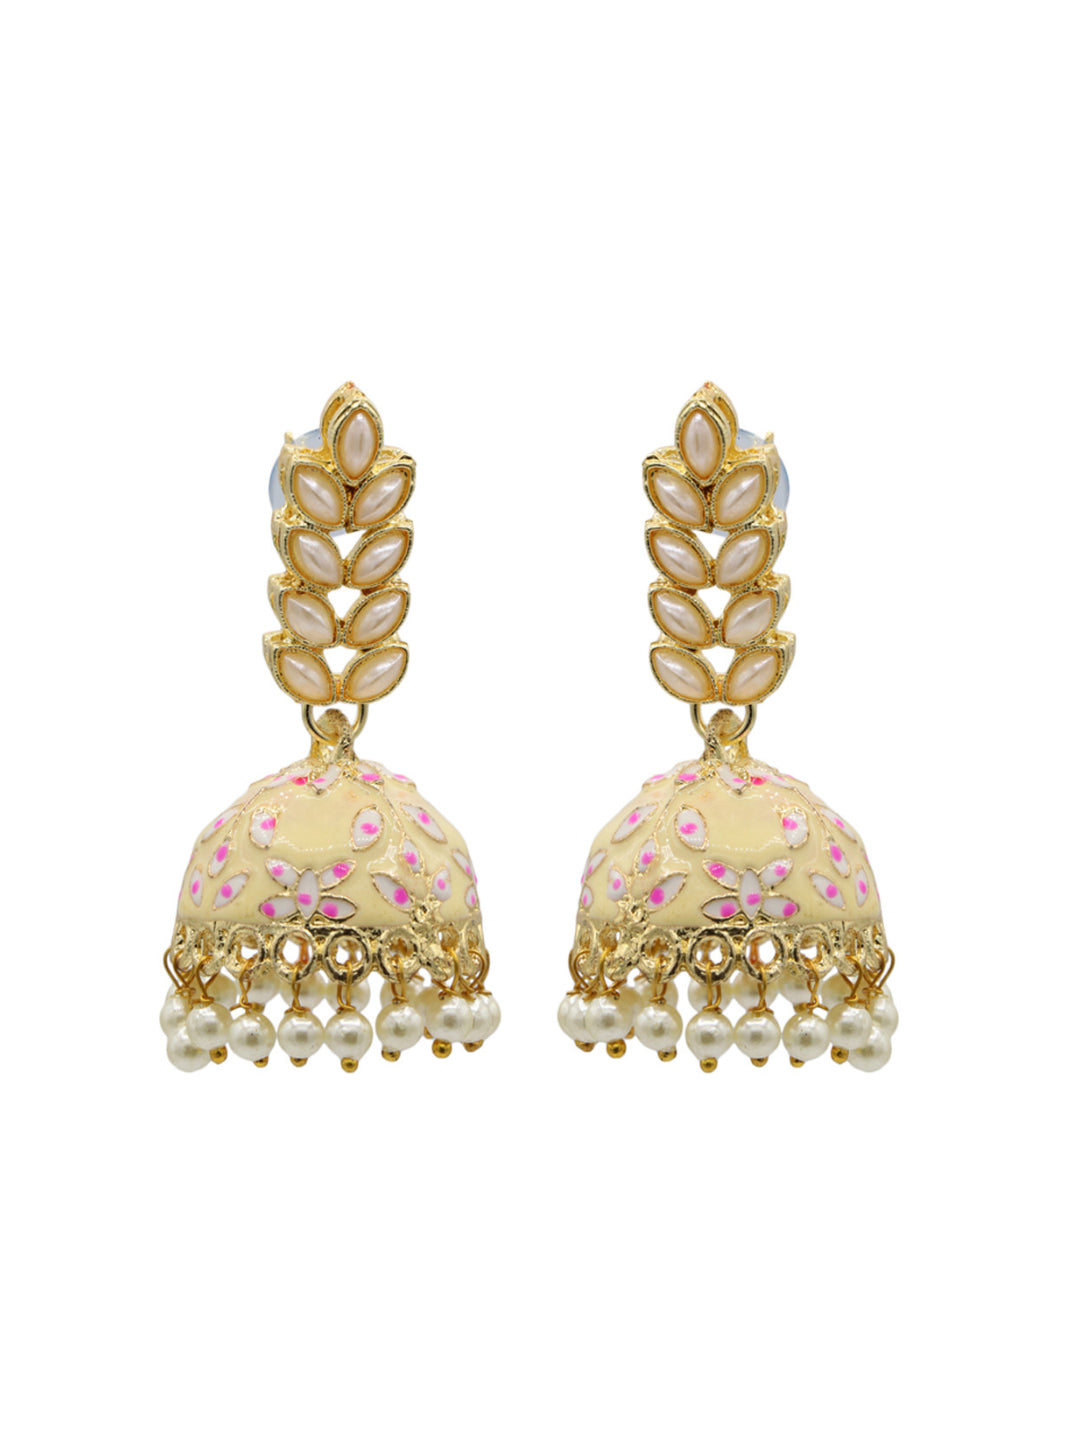 Dome Shaped Artificial Stones & Beads Studded Jhumkas Earrings